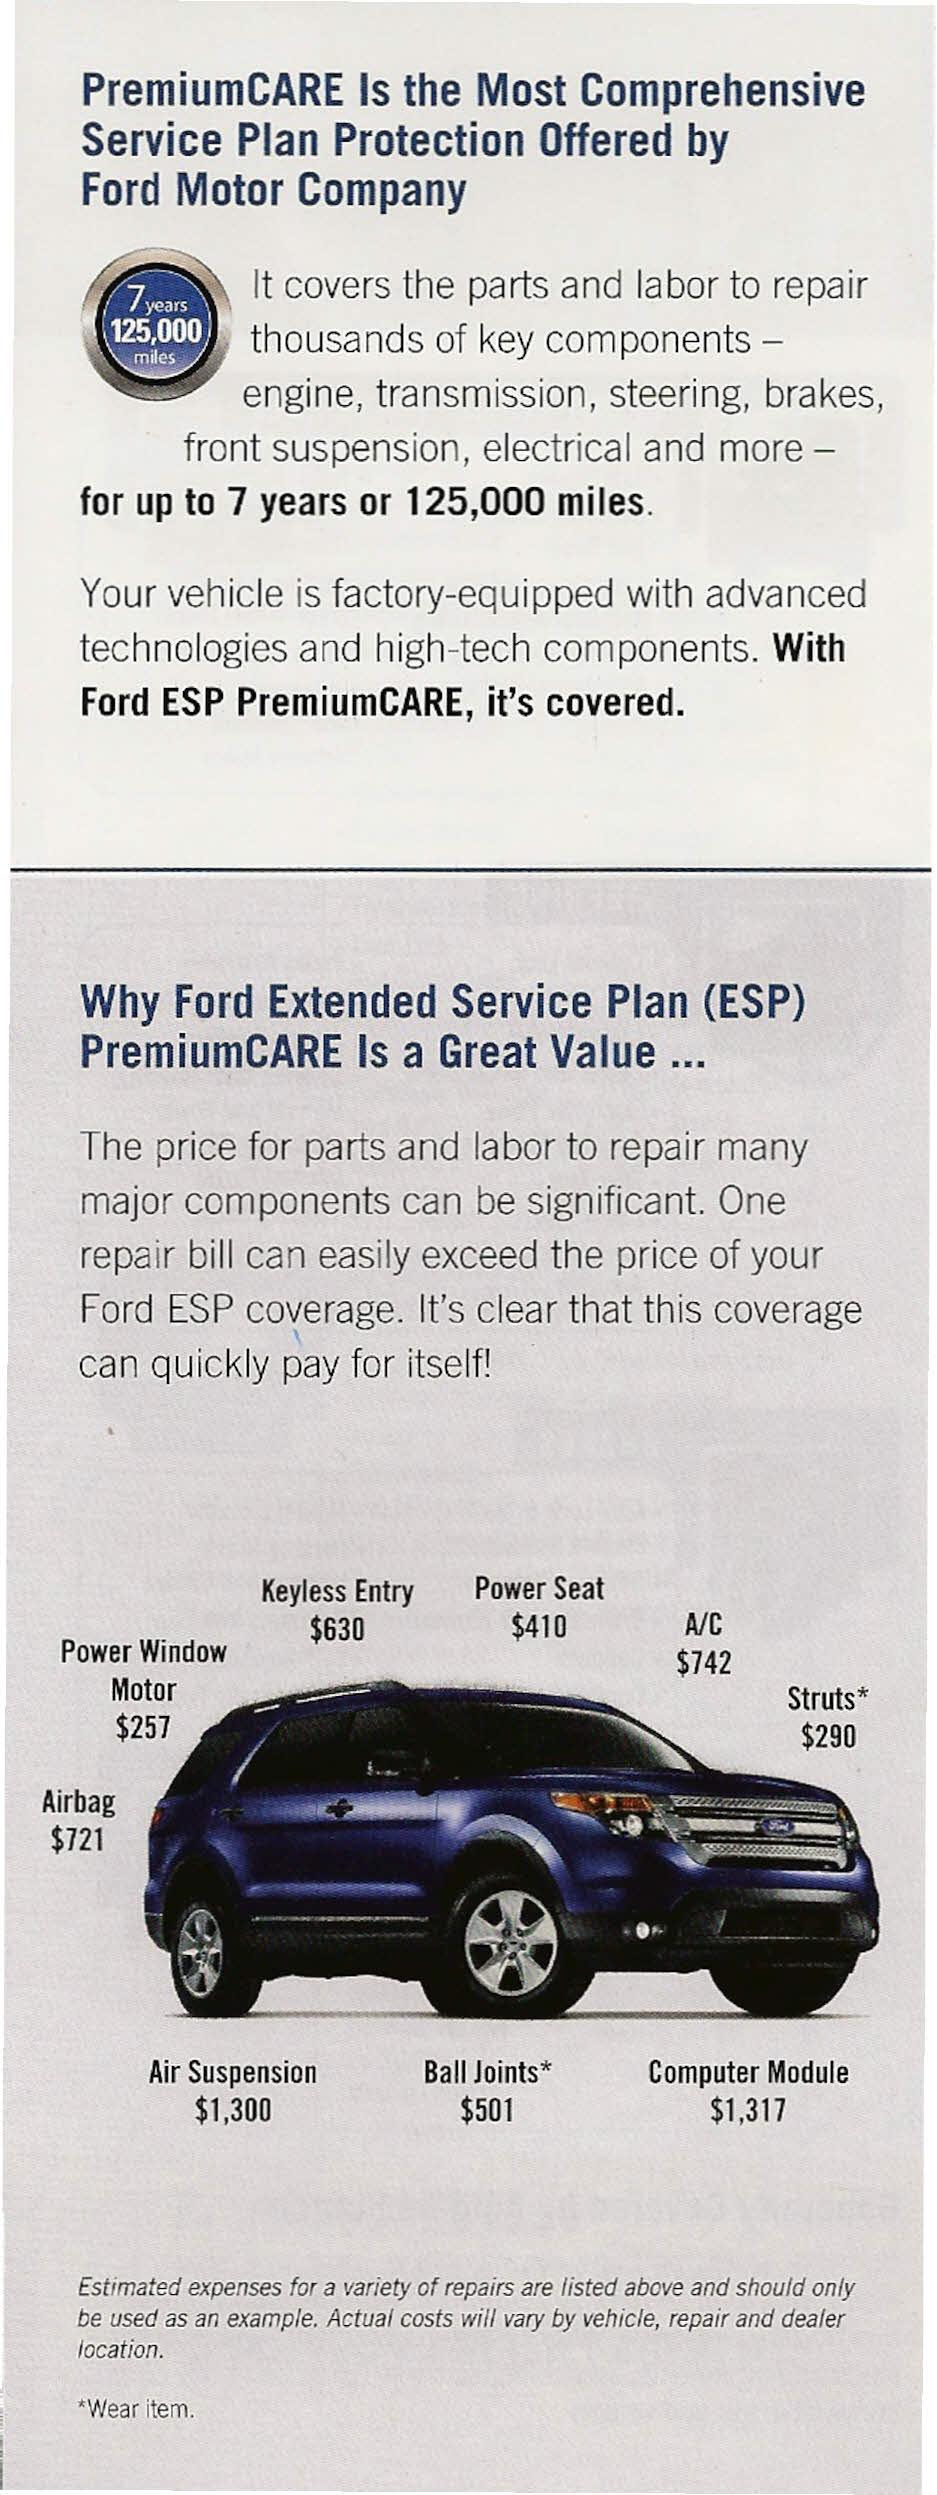 PremiumCARE Is the Most Comprehensive Service Plan Protection Offered by Ford Motor Company It covers the parts and labor to repair thousands of key components - engine, transmission, steering,